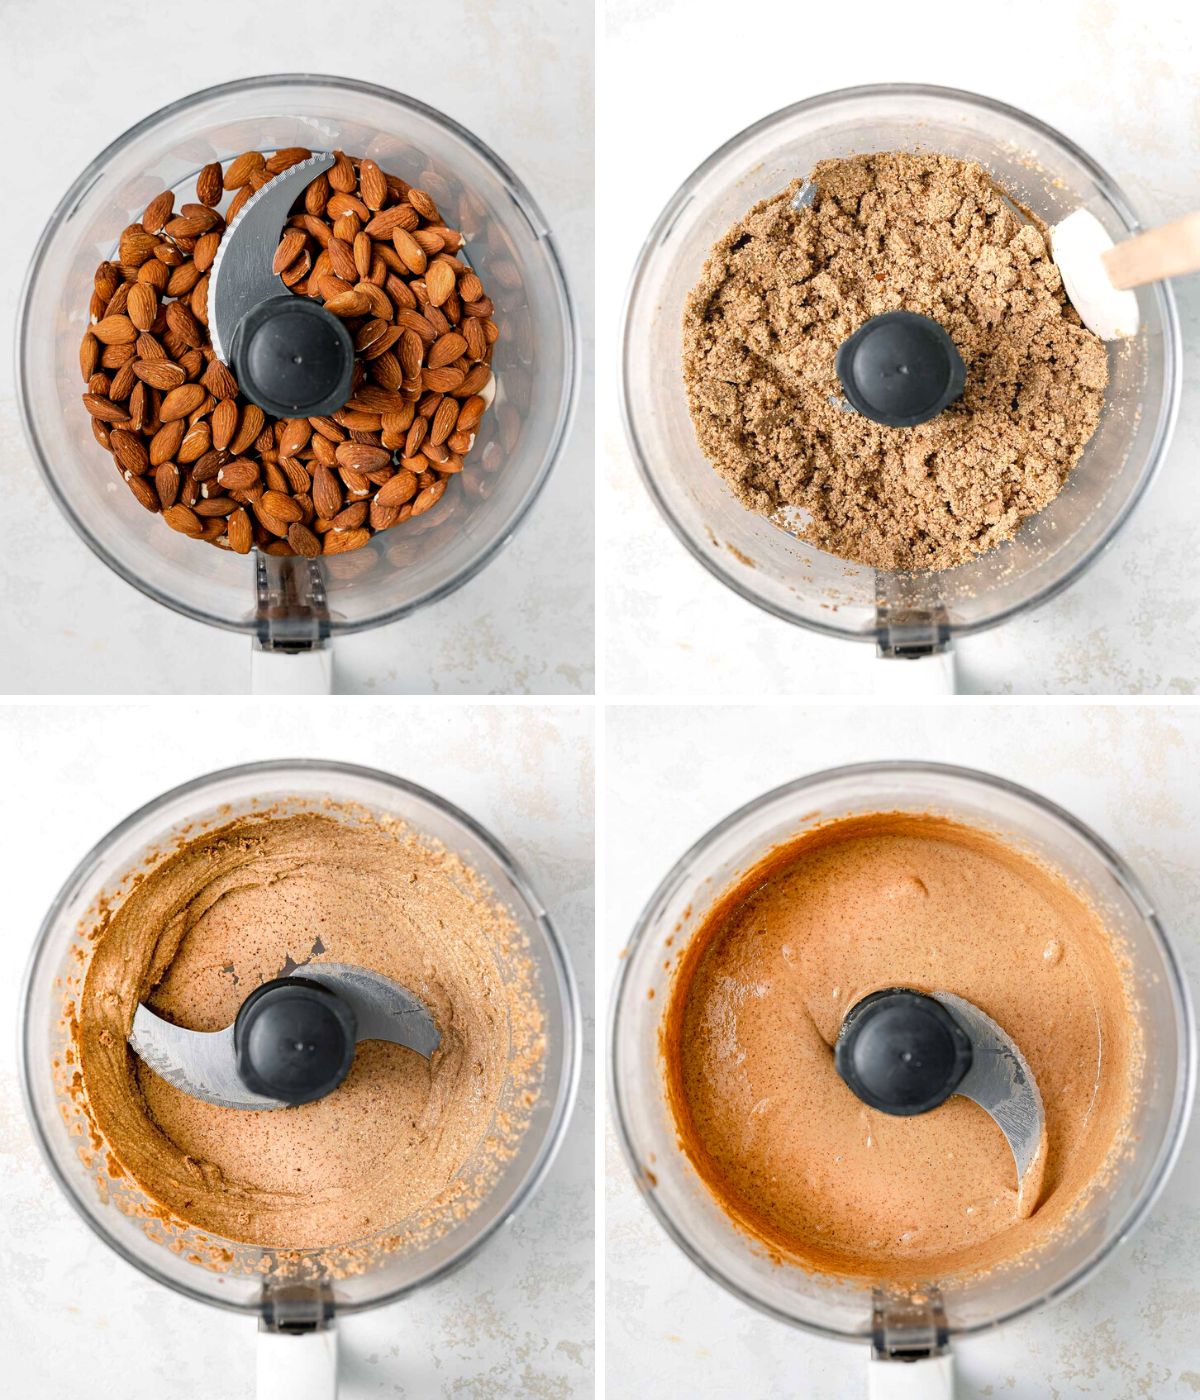 the 4 stages of blending almond butter: 1 raw almonds, 2 sandy looking almonds, 3 grainy, thick butter, 4 smooth and drippy. 